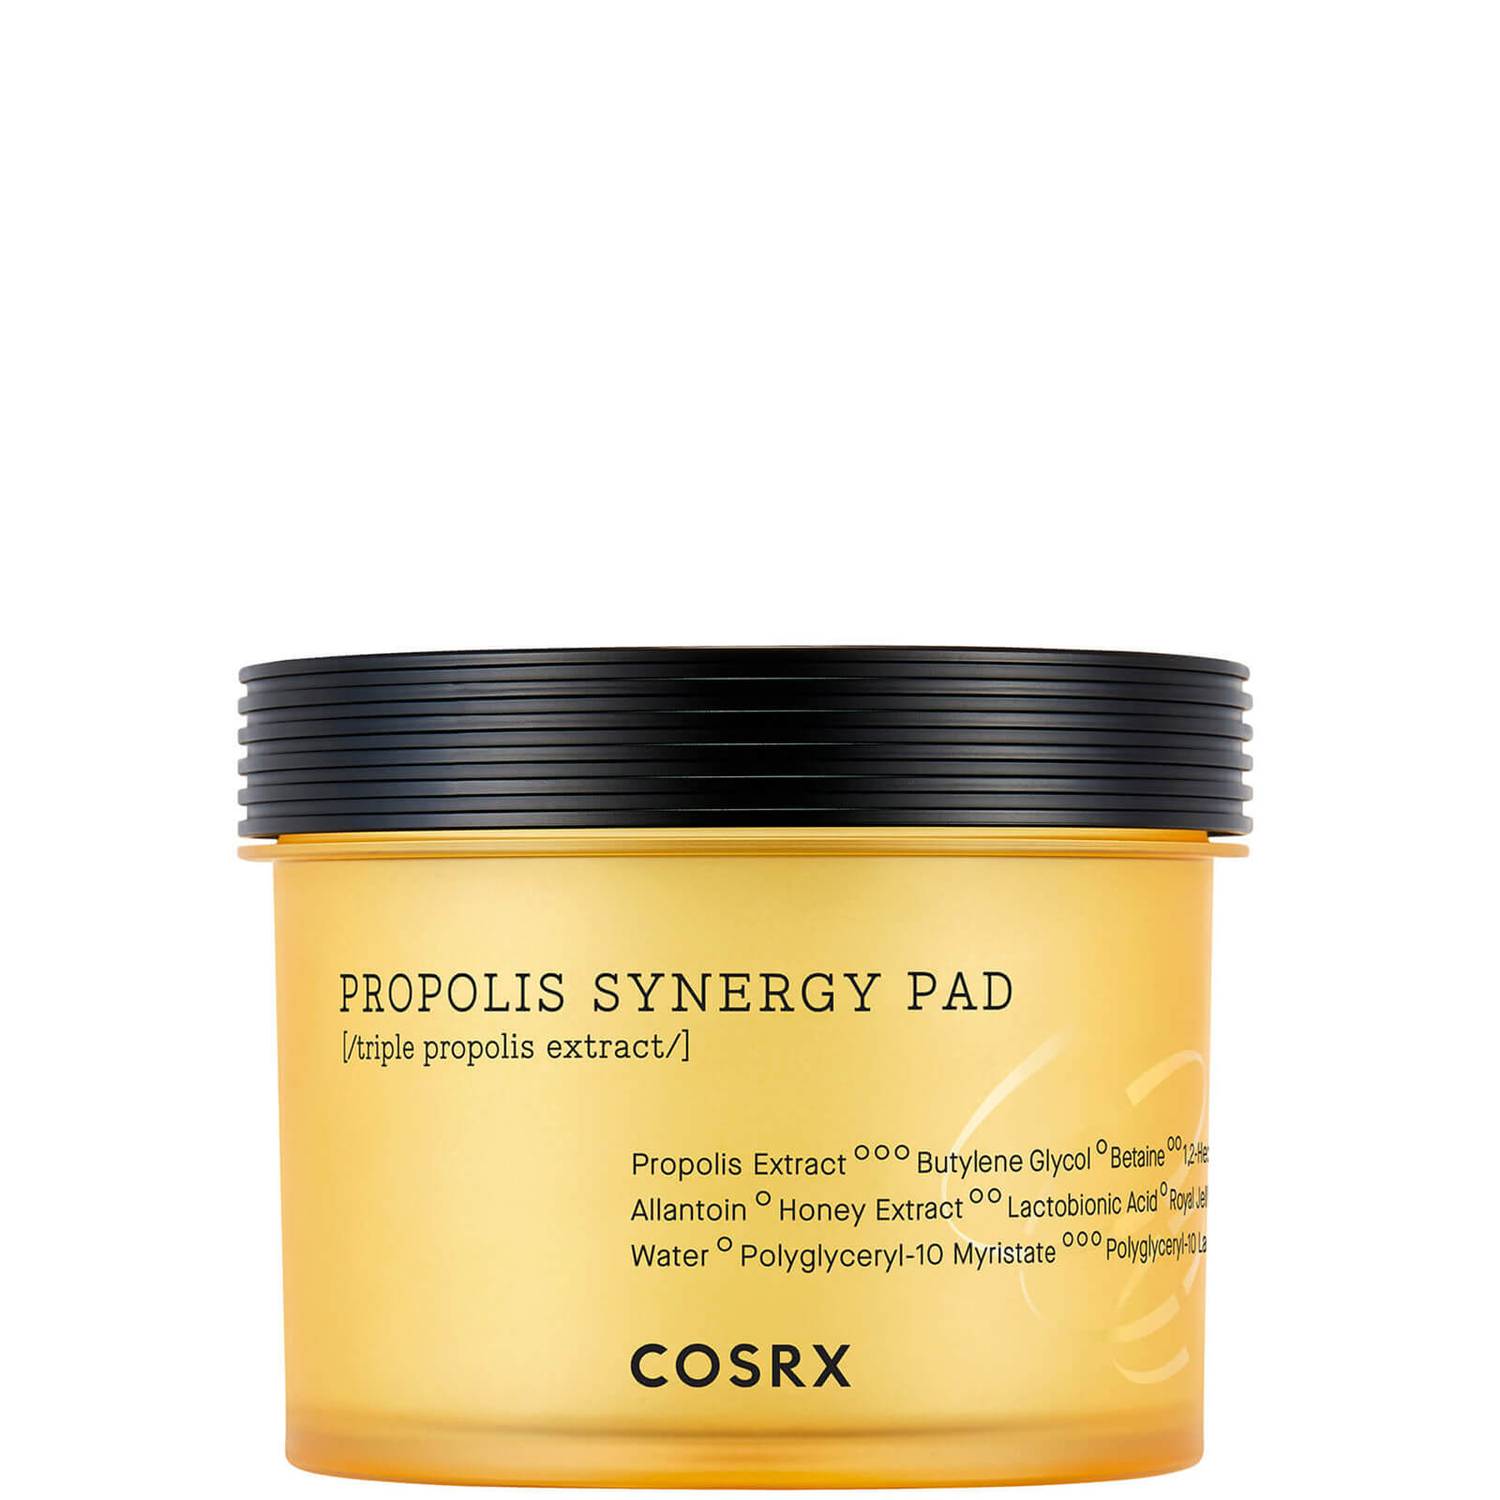 COSRX - Full Fit Propolis Synergy Pad